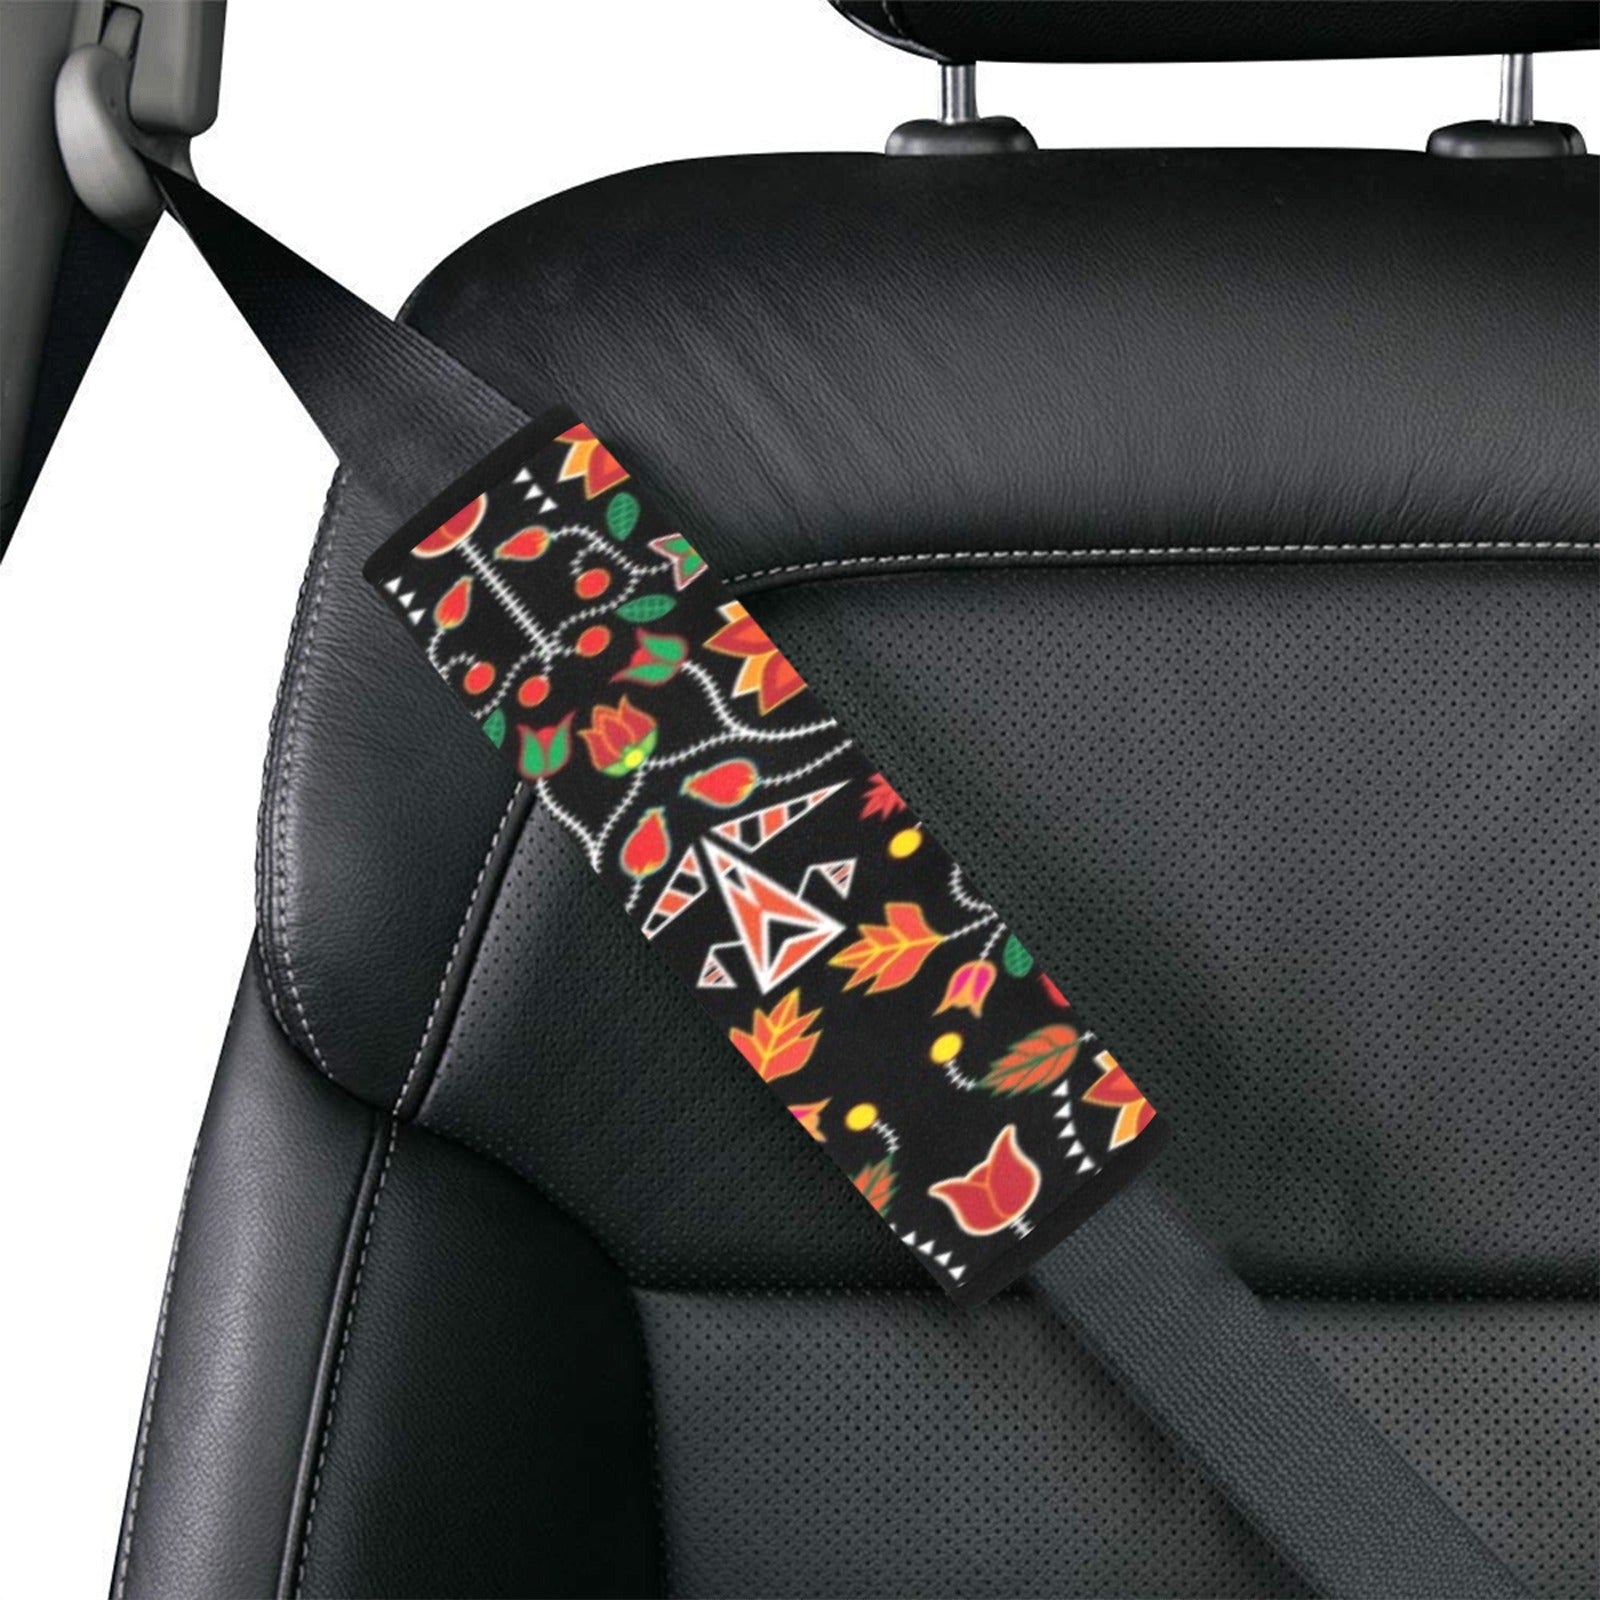 Floral Beadwork Six Bands Car Seat Belt Cover 7''x12.6'' (Pack of 2) Car Seat Belt Cover 7x12.6 (Pack of 2) e-joyer 